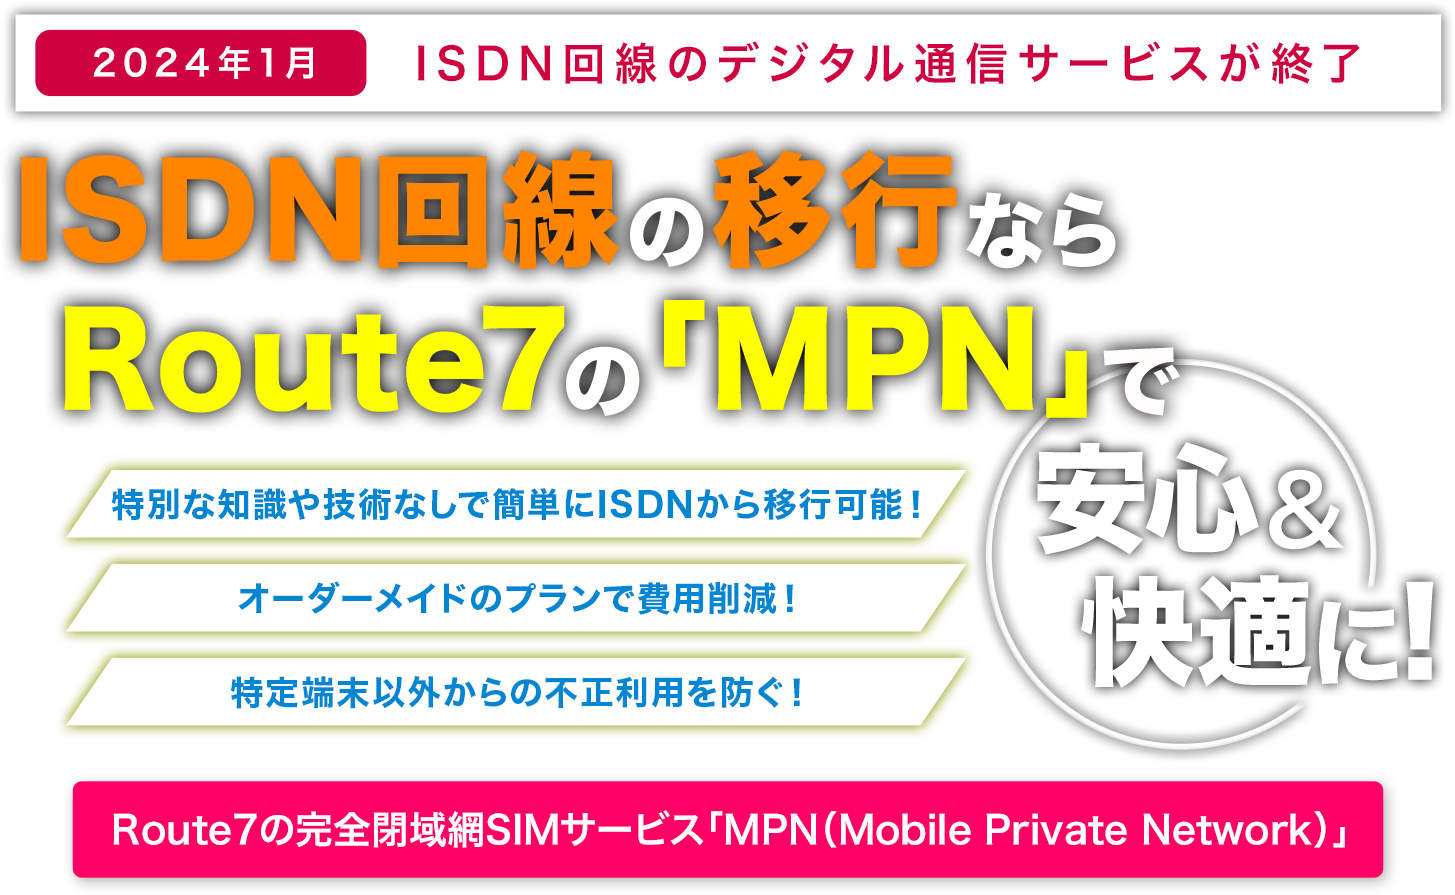 ISDN回線の移行なら、Route7の「MPN（Mobile Private Network）」で安心&快適に！